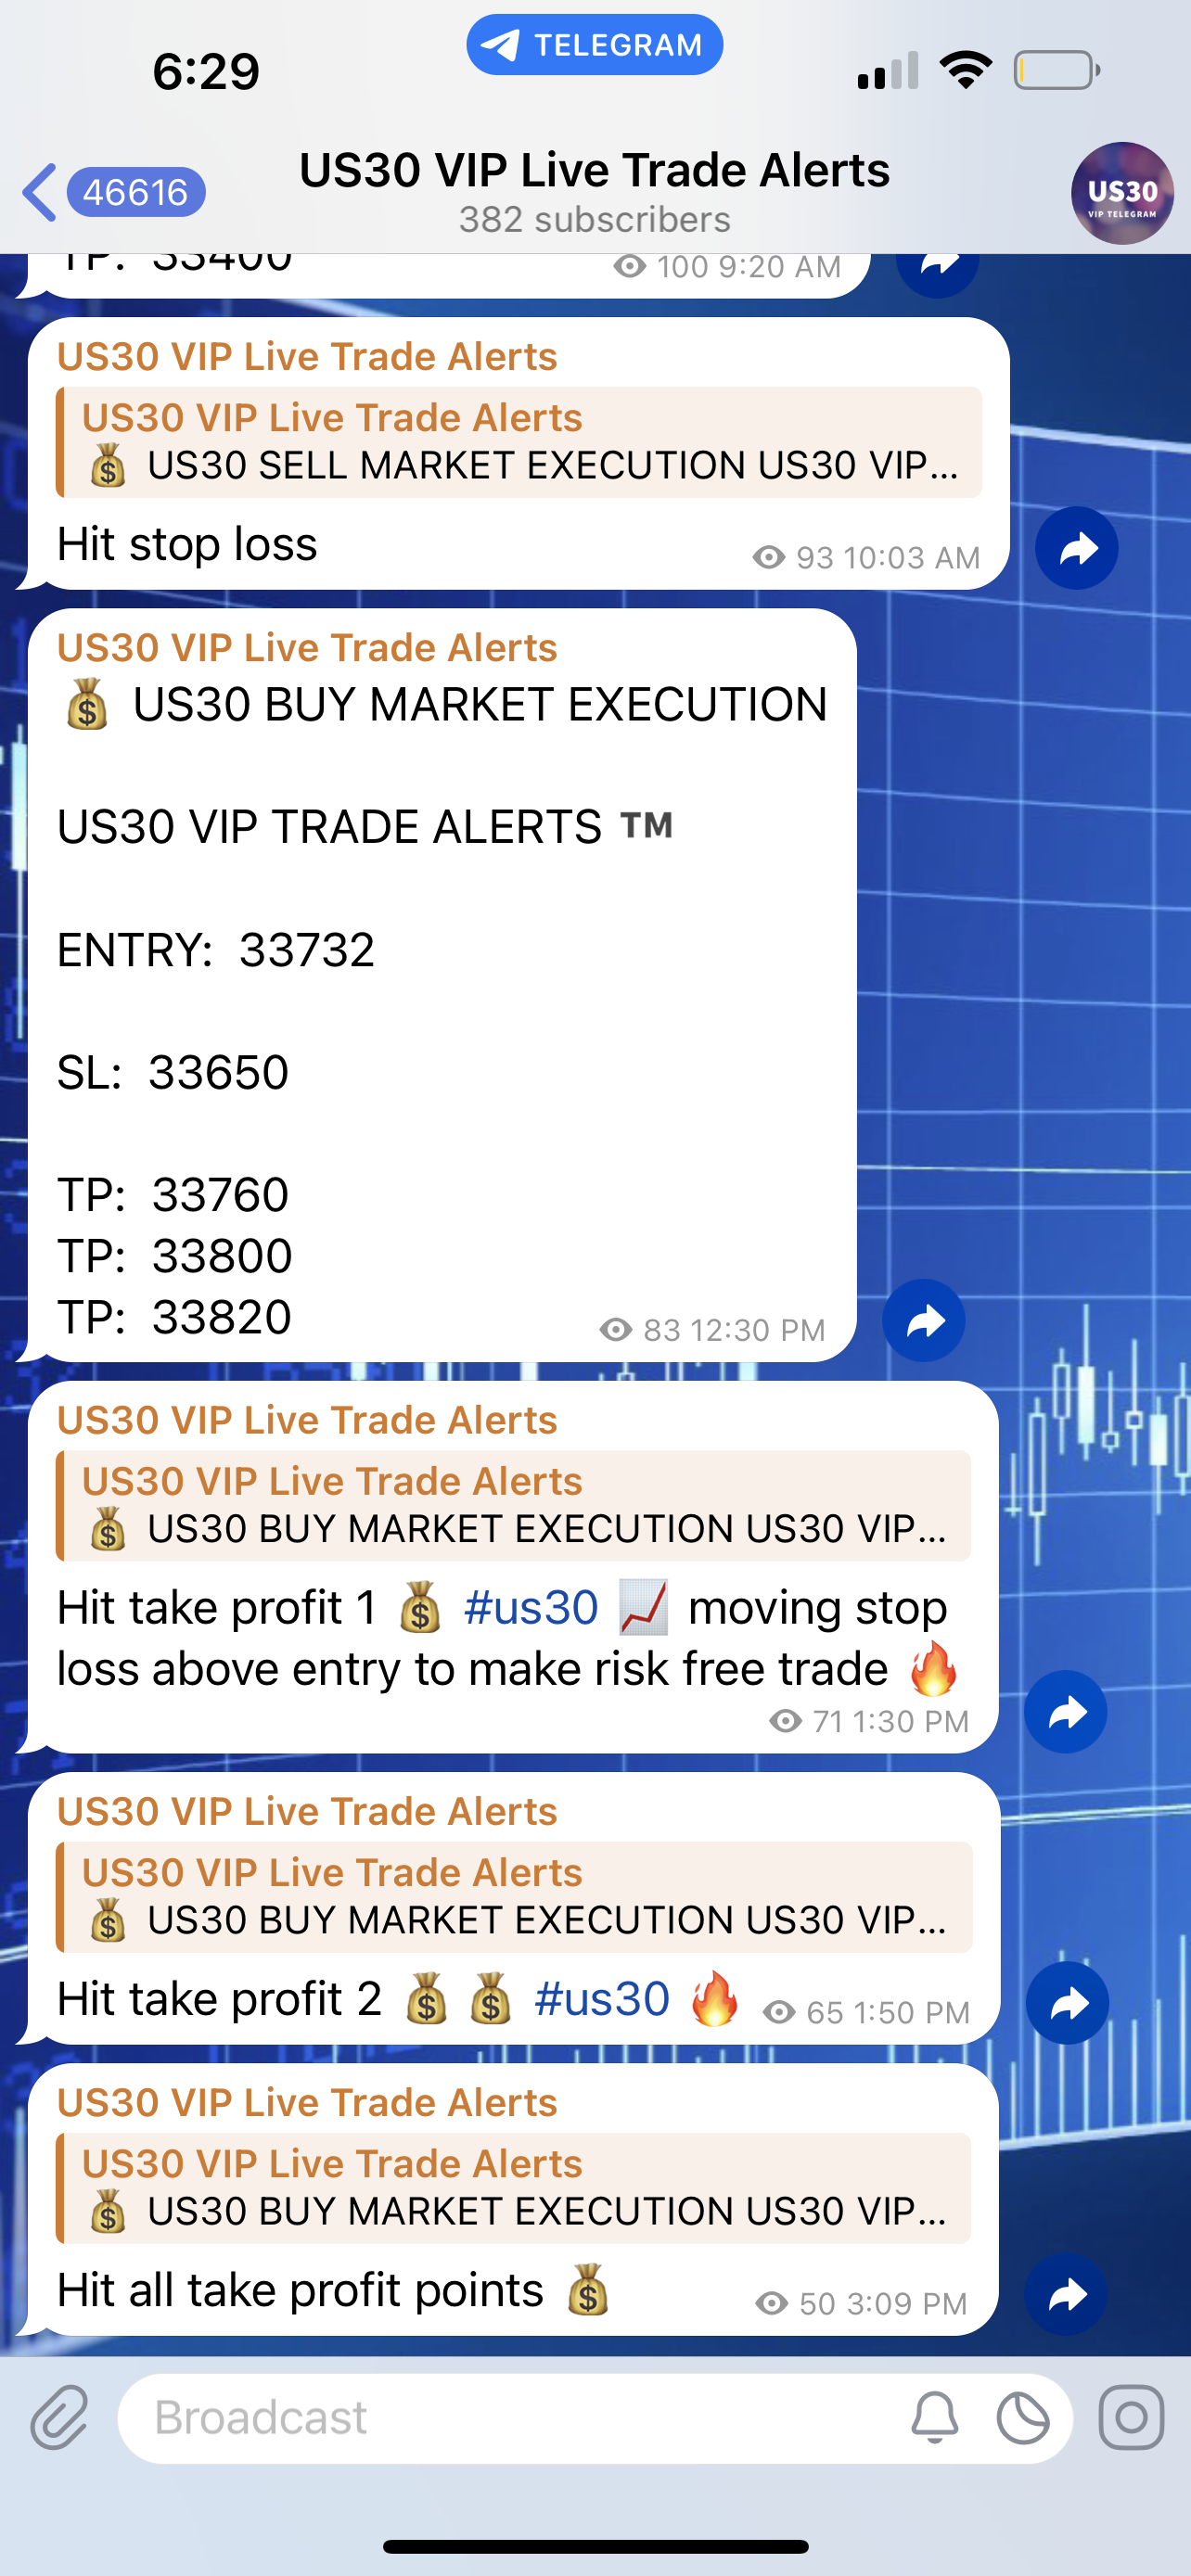 US30 VIP ACADEMY ONLINE FOREX COURSE & US30 VIP SIGNALS & US30 VIP AI TRADING ALGORITHM - us30vipacademy